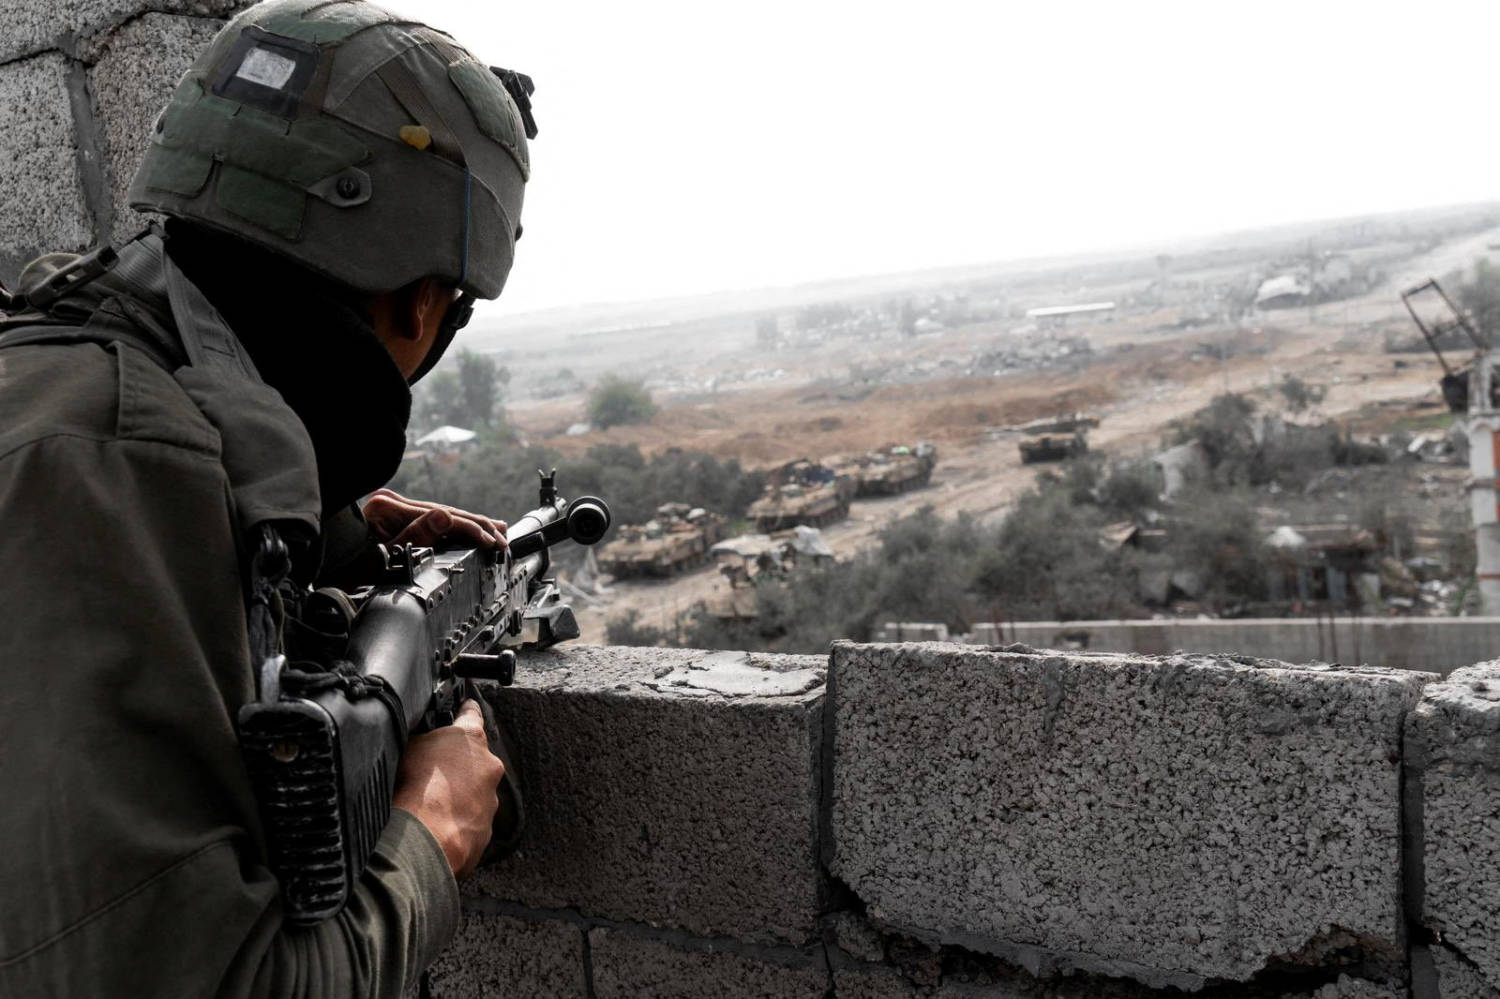 Israeli Soldiers Operate In The Gaza Strip Amid The Ongoing Conflict Between Israel And Hamas